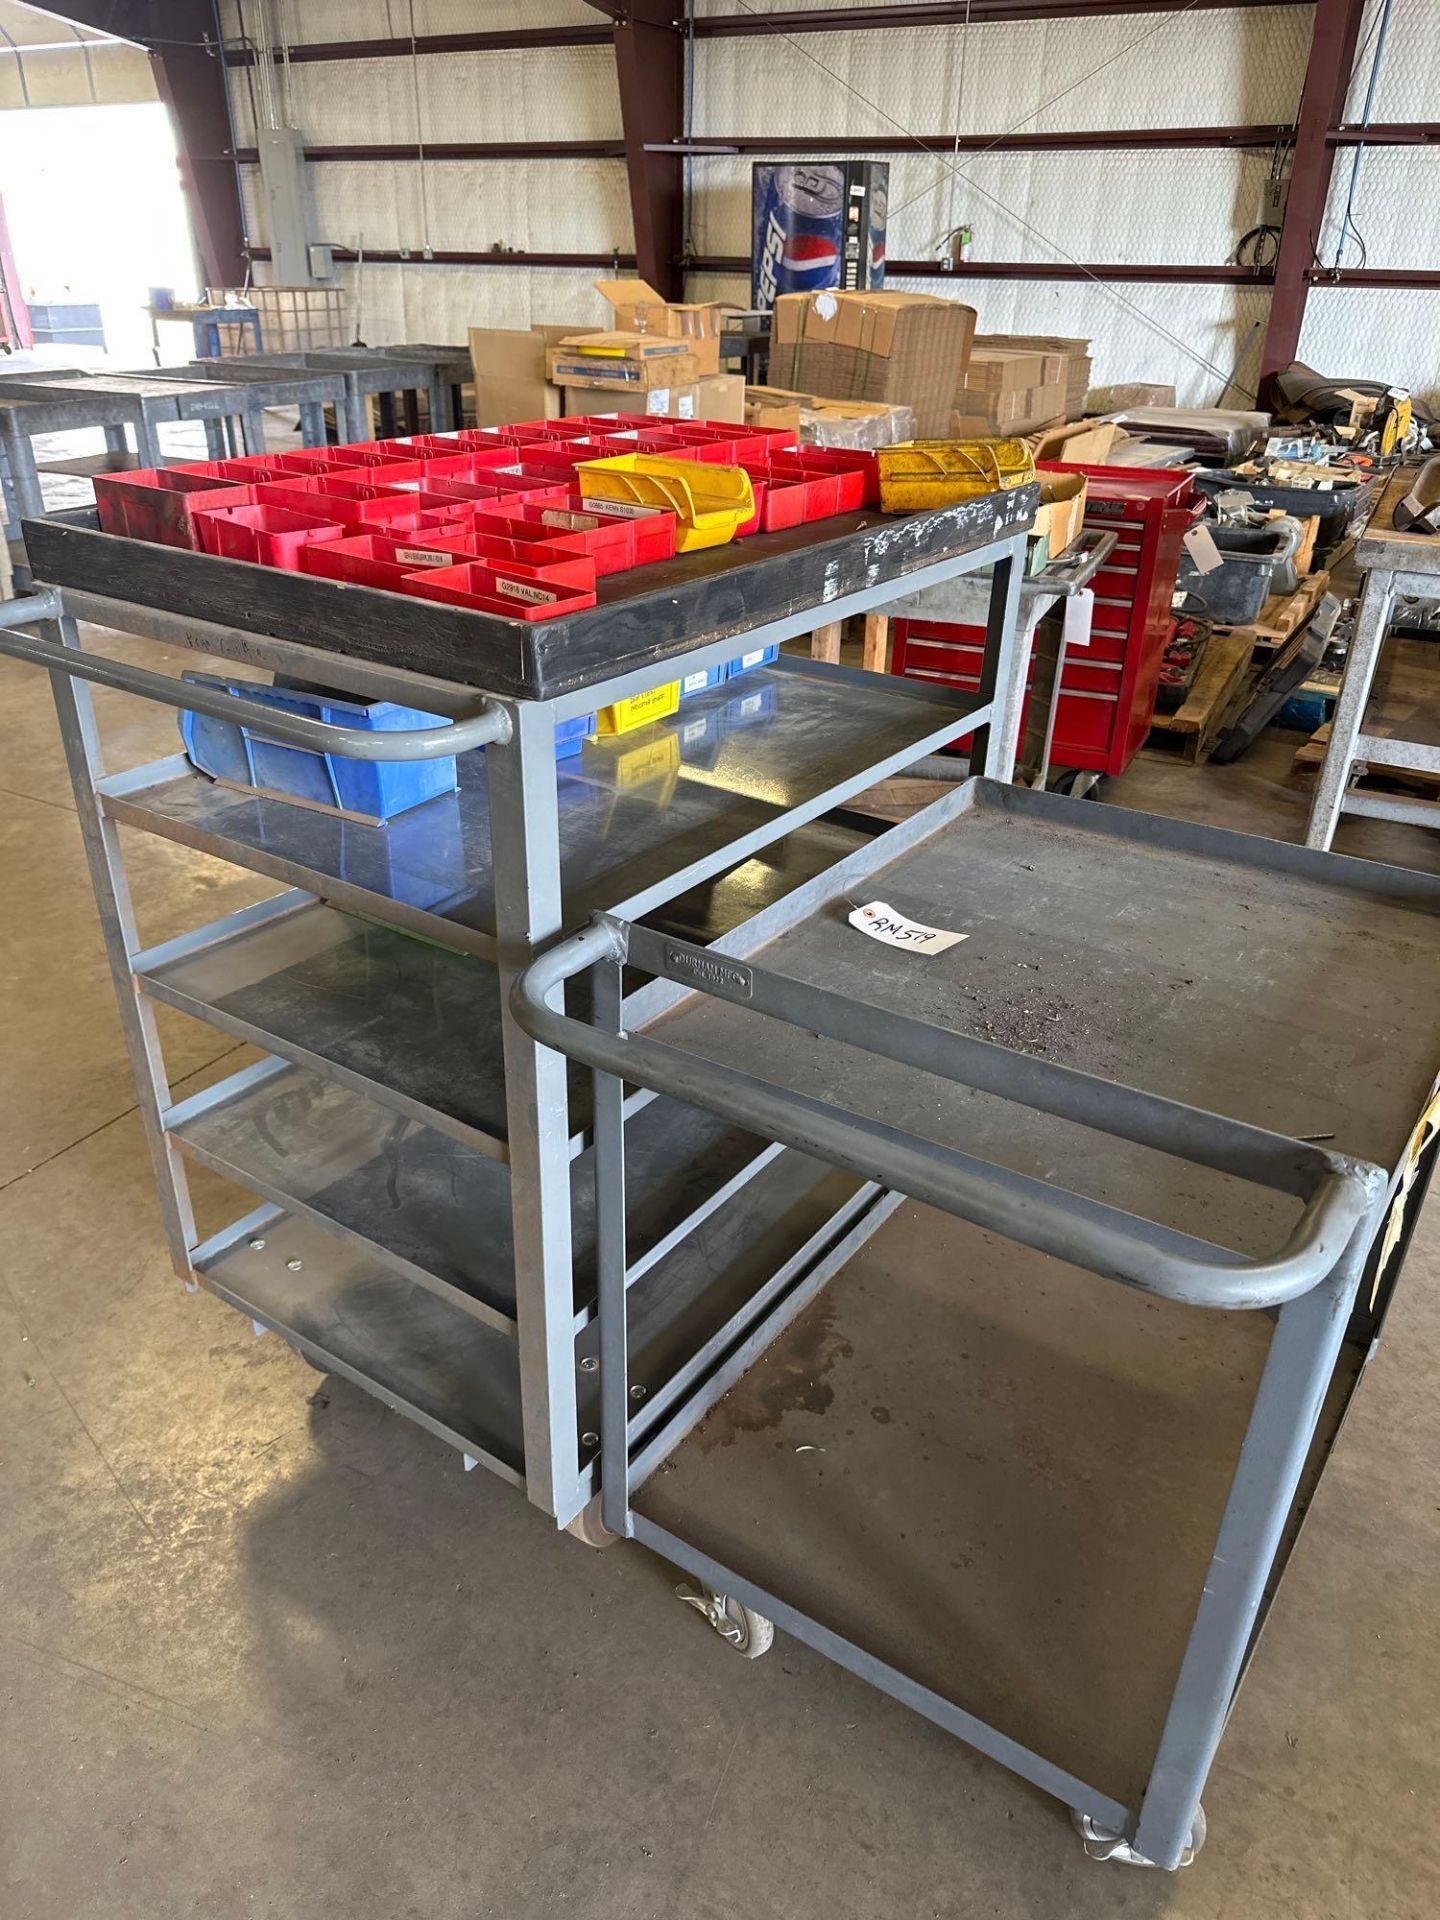 (2) METAL ROLLING CARTS WITH PLASTIC BINS